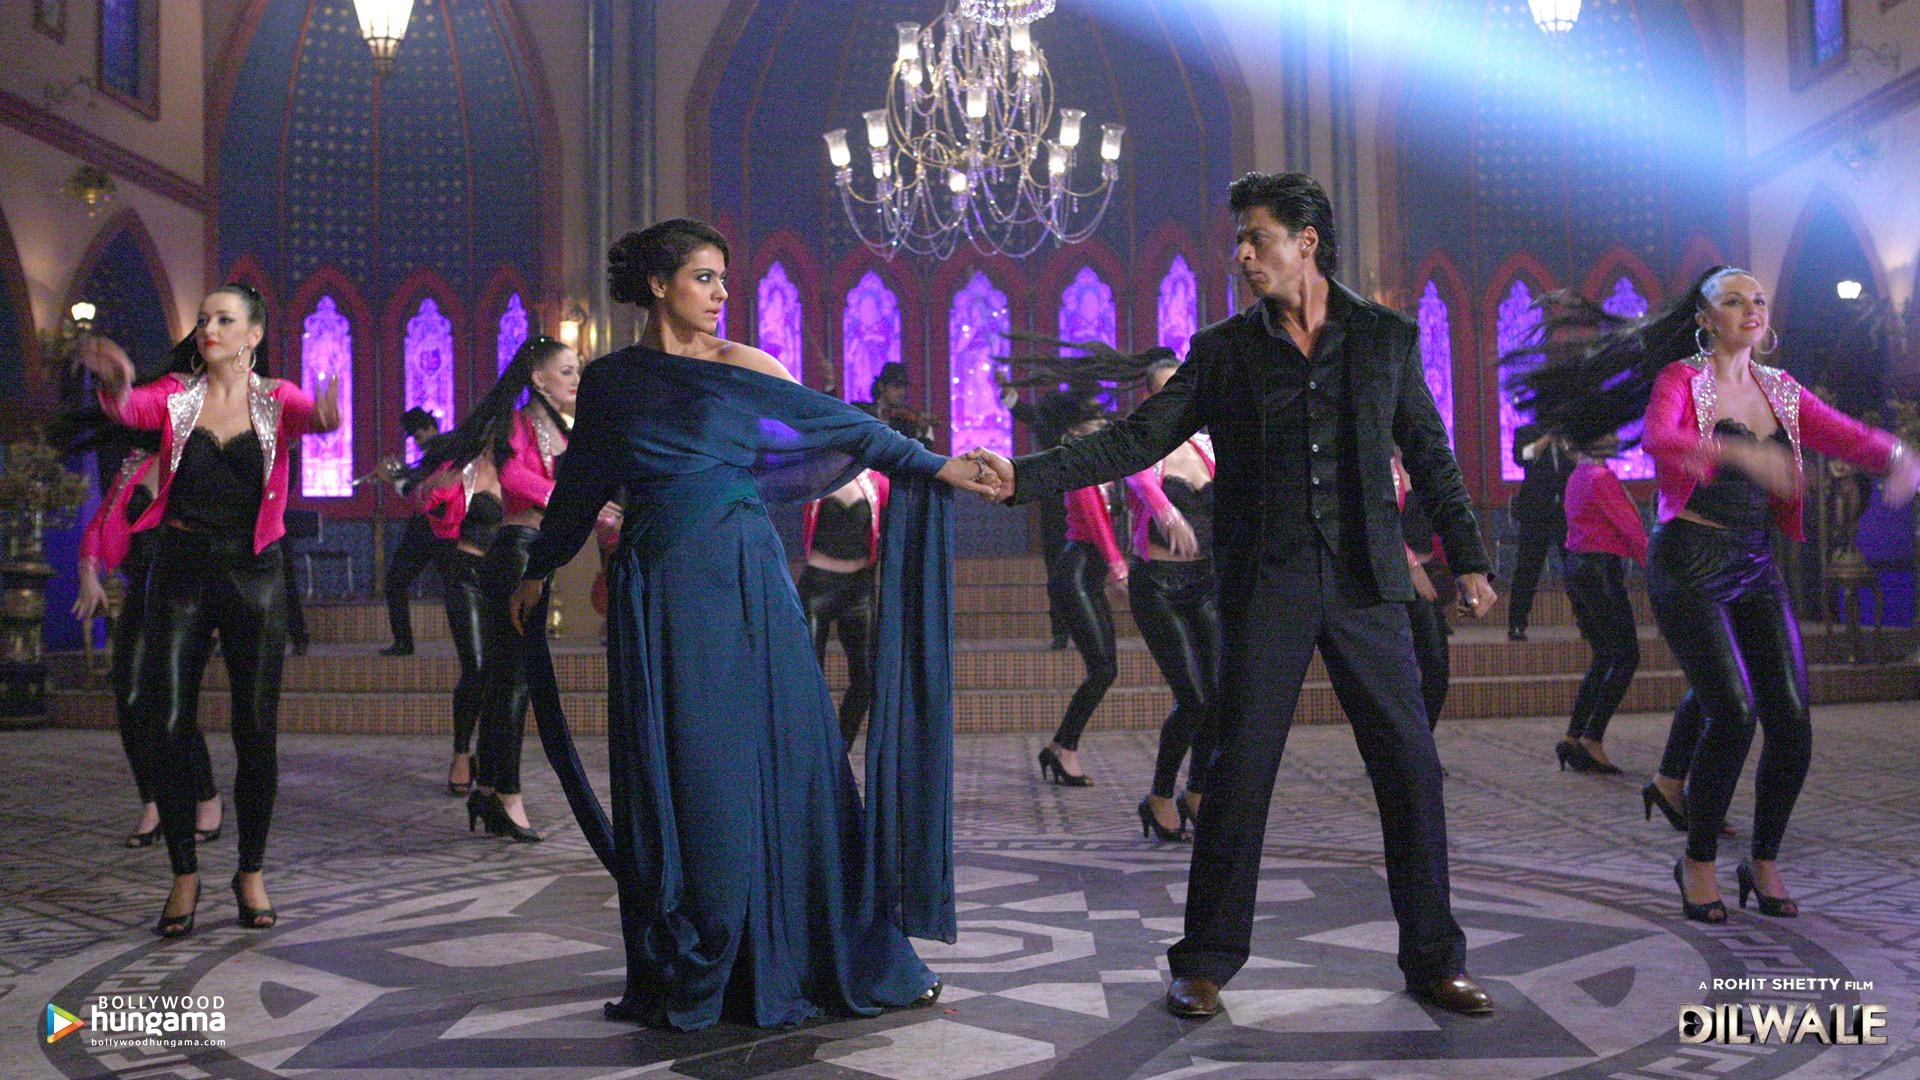 Shah Rukh Khan and Kajol for Promotions of Dilwale on Bigg Boss 9 Photo